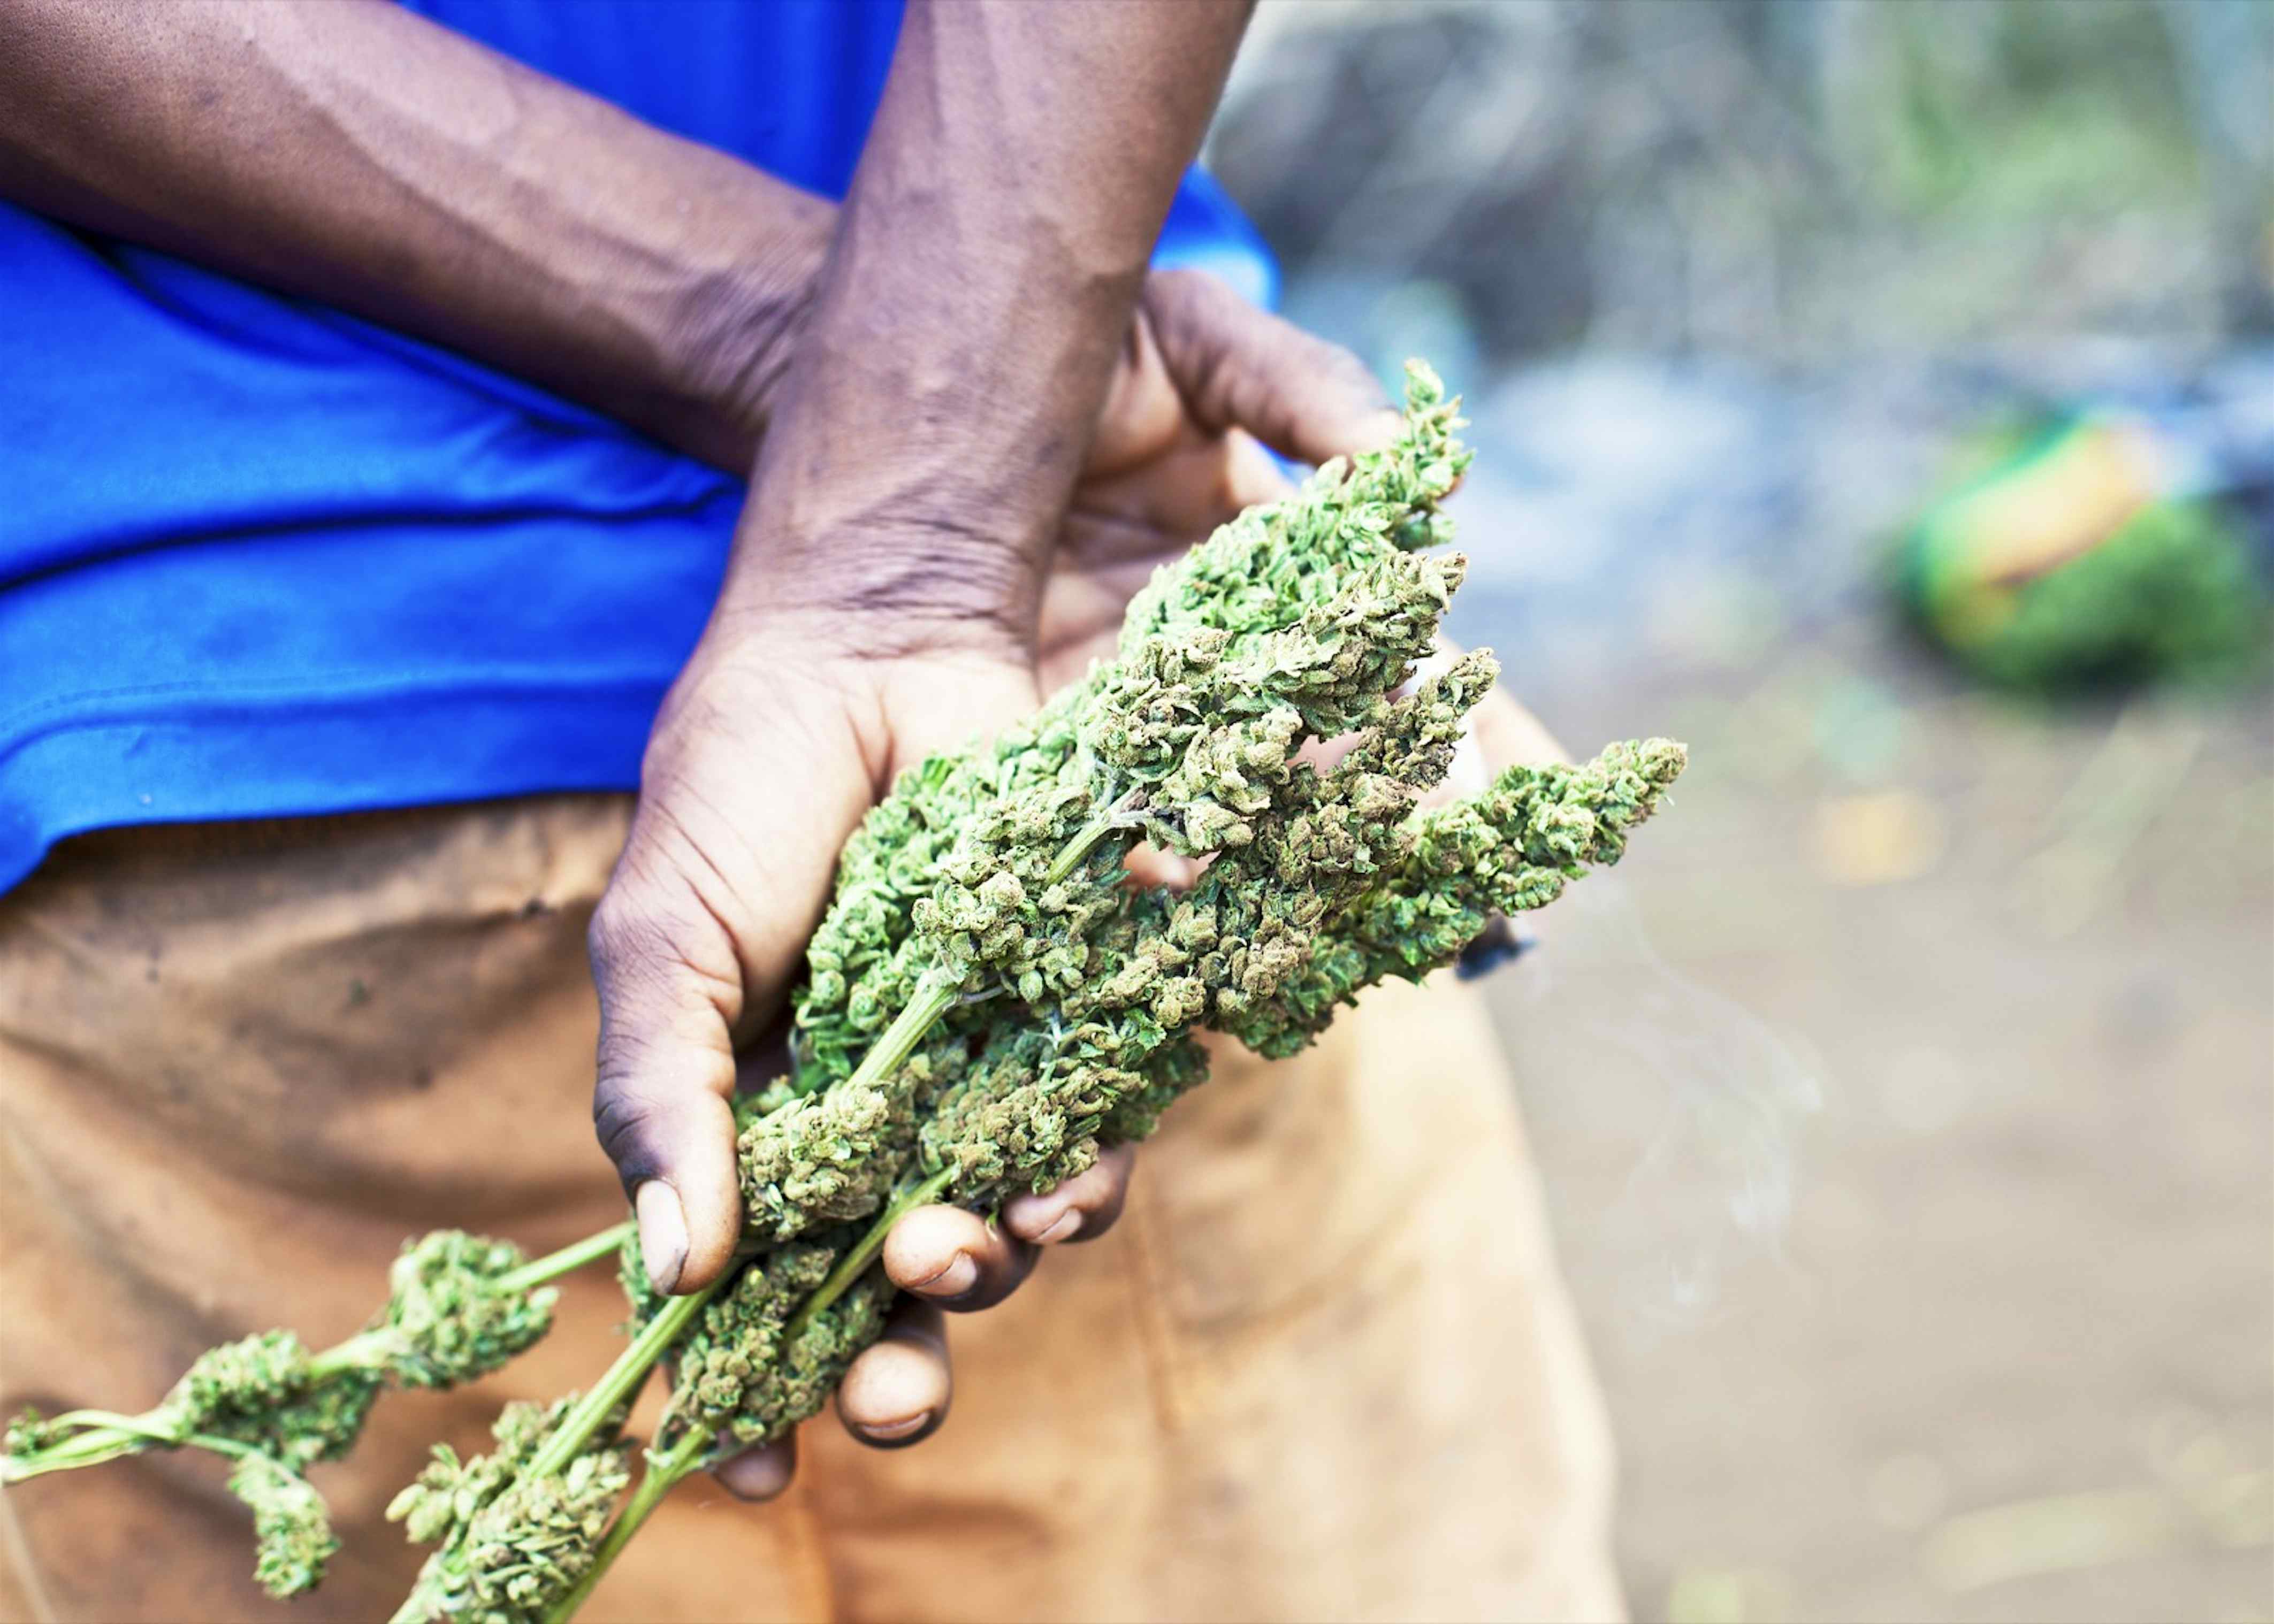 What you need to know about smoking weed legally in Jamaica